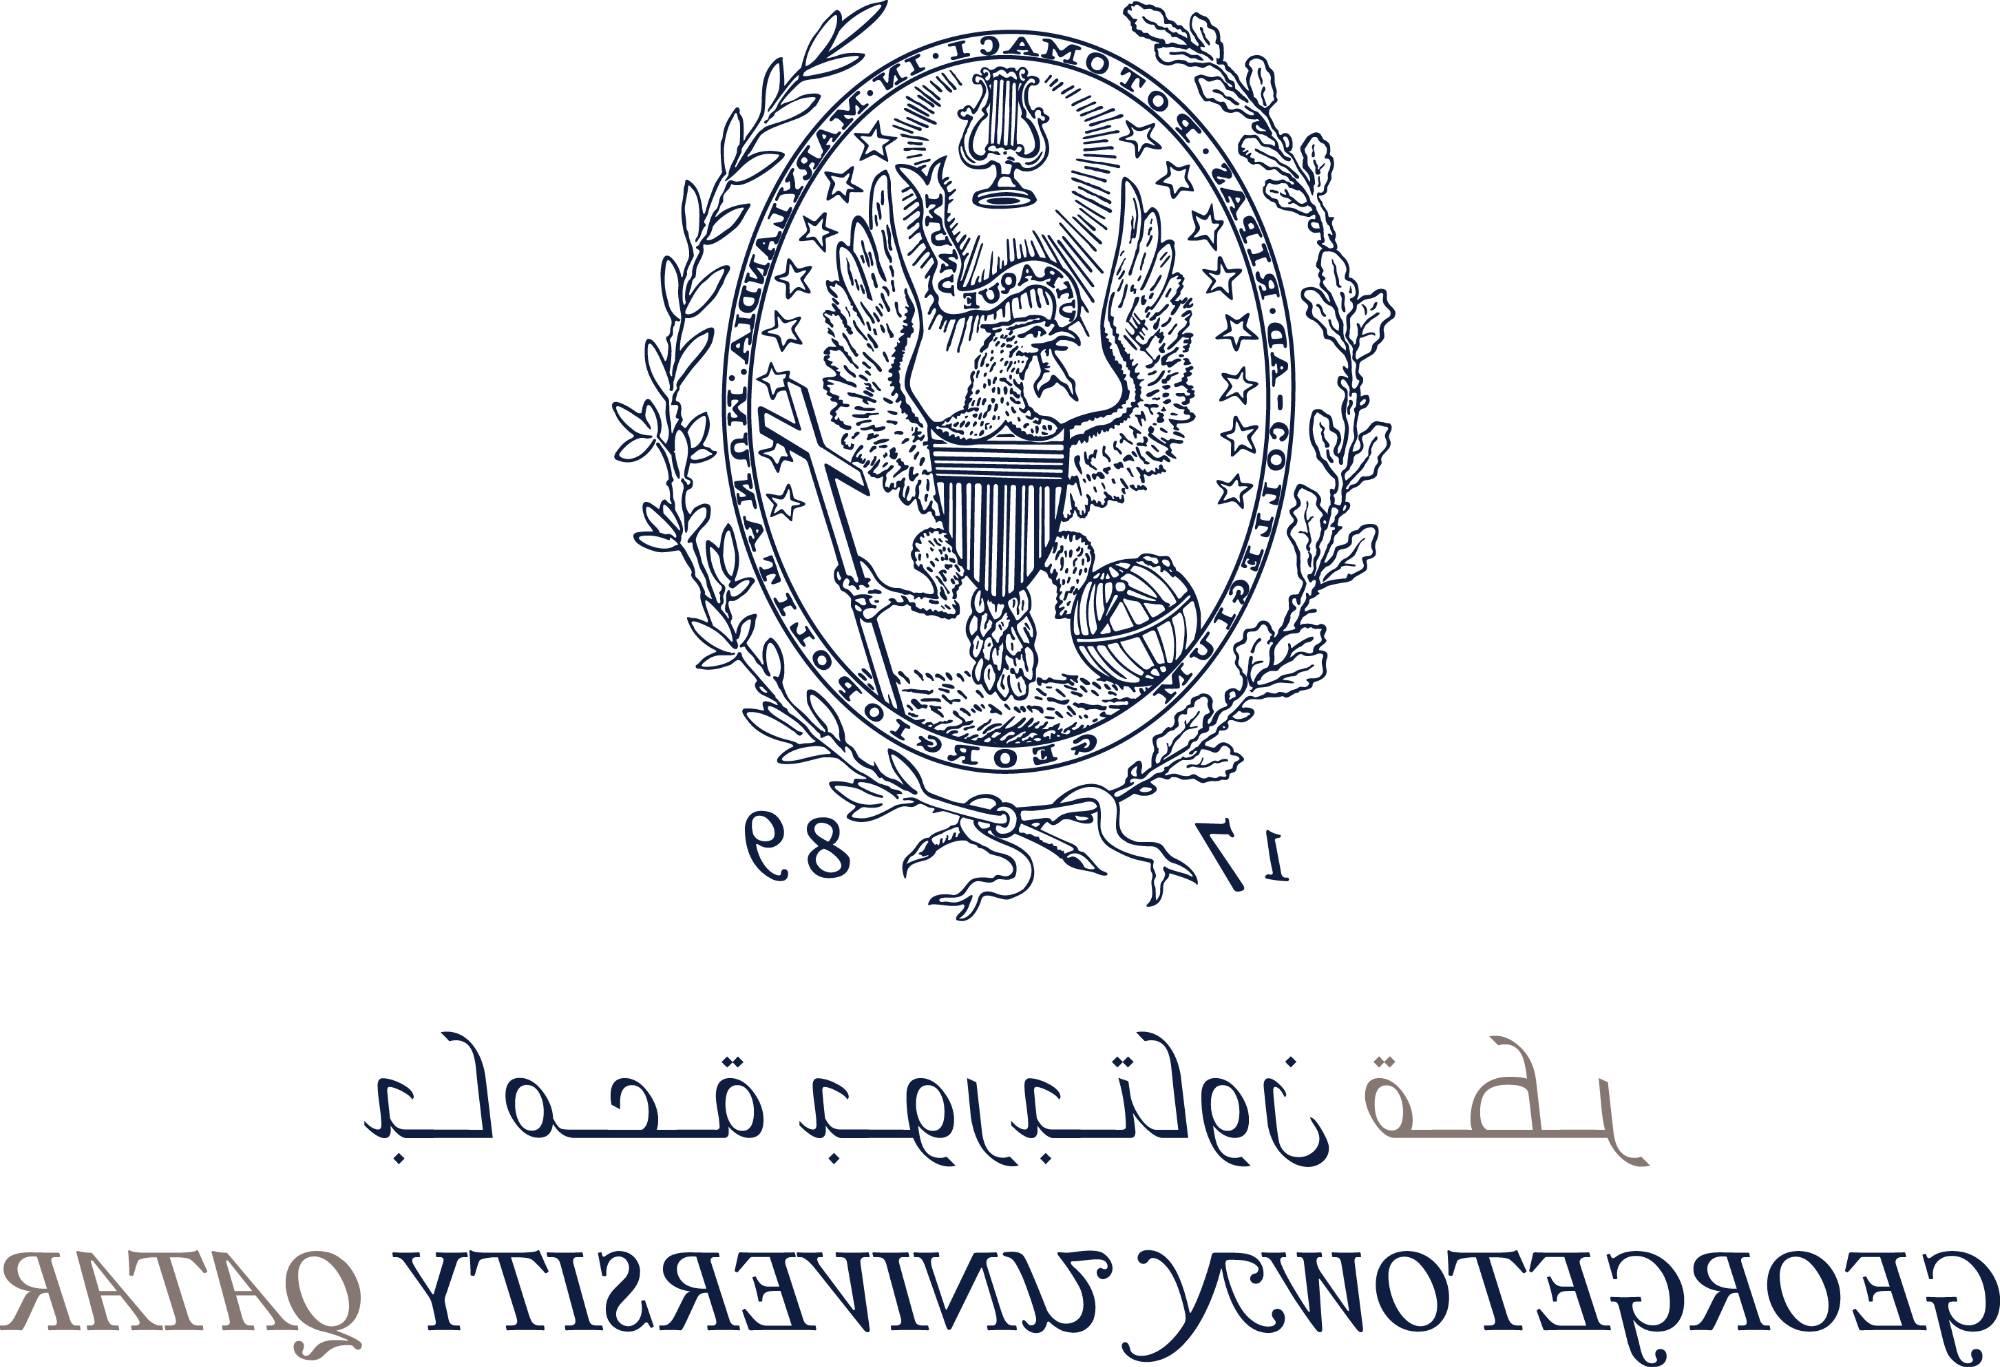 The Georgetown University at Qatar logo features an American Eagle holding a globe in its right claw, a Christian crucifix in its left claw, a Lyre above it, 16 stars representing the states that existed when it was created, An inscription which reads: "Collegium Georgiopolitanum Ad Ripas Potomaci In Marylandia translates to &#8220;Georgetown College on the banks of the Potomac in Maryland.&#8221; And the words "Utraque Unum"  which loosely translates to &#8220;from several parts into one,&#8221; suggests the harmony that can exist between science and religion.